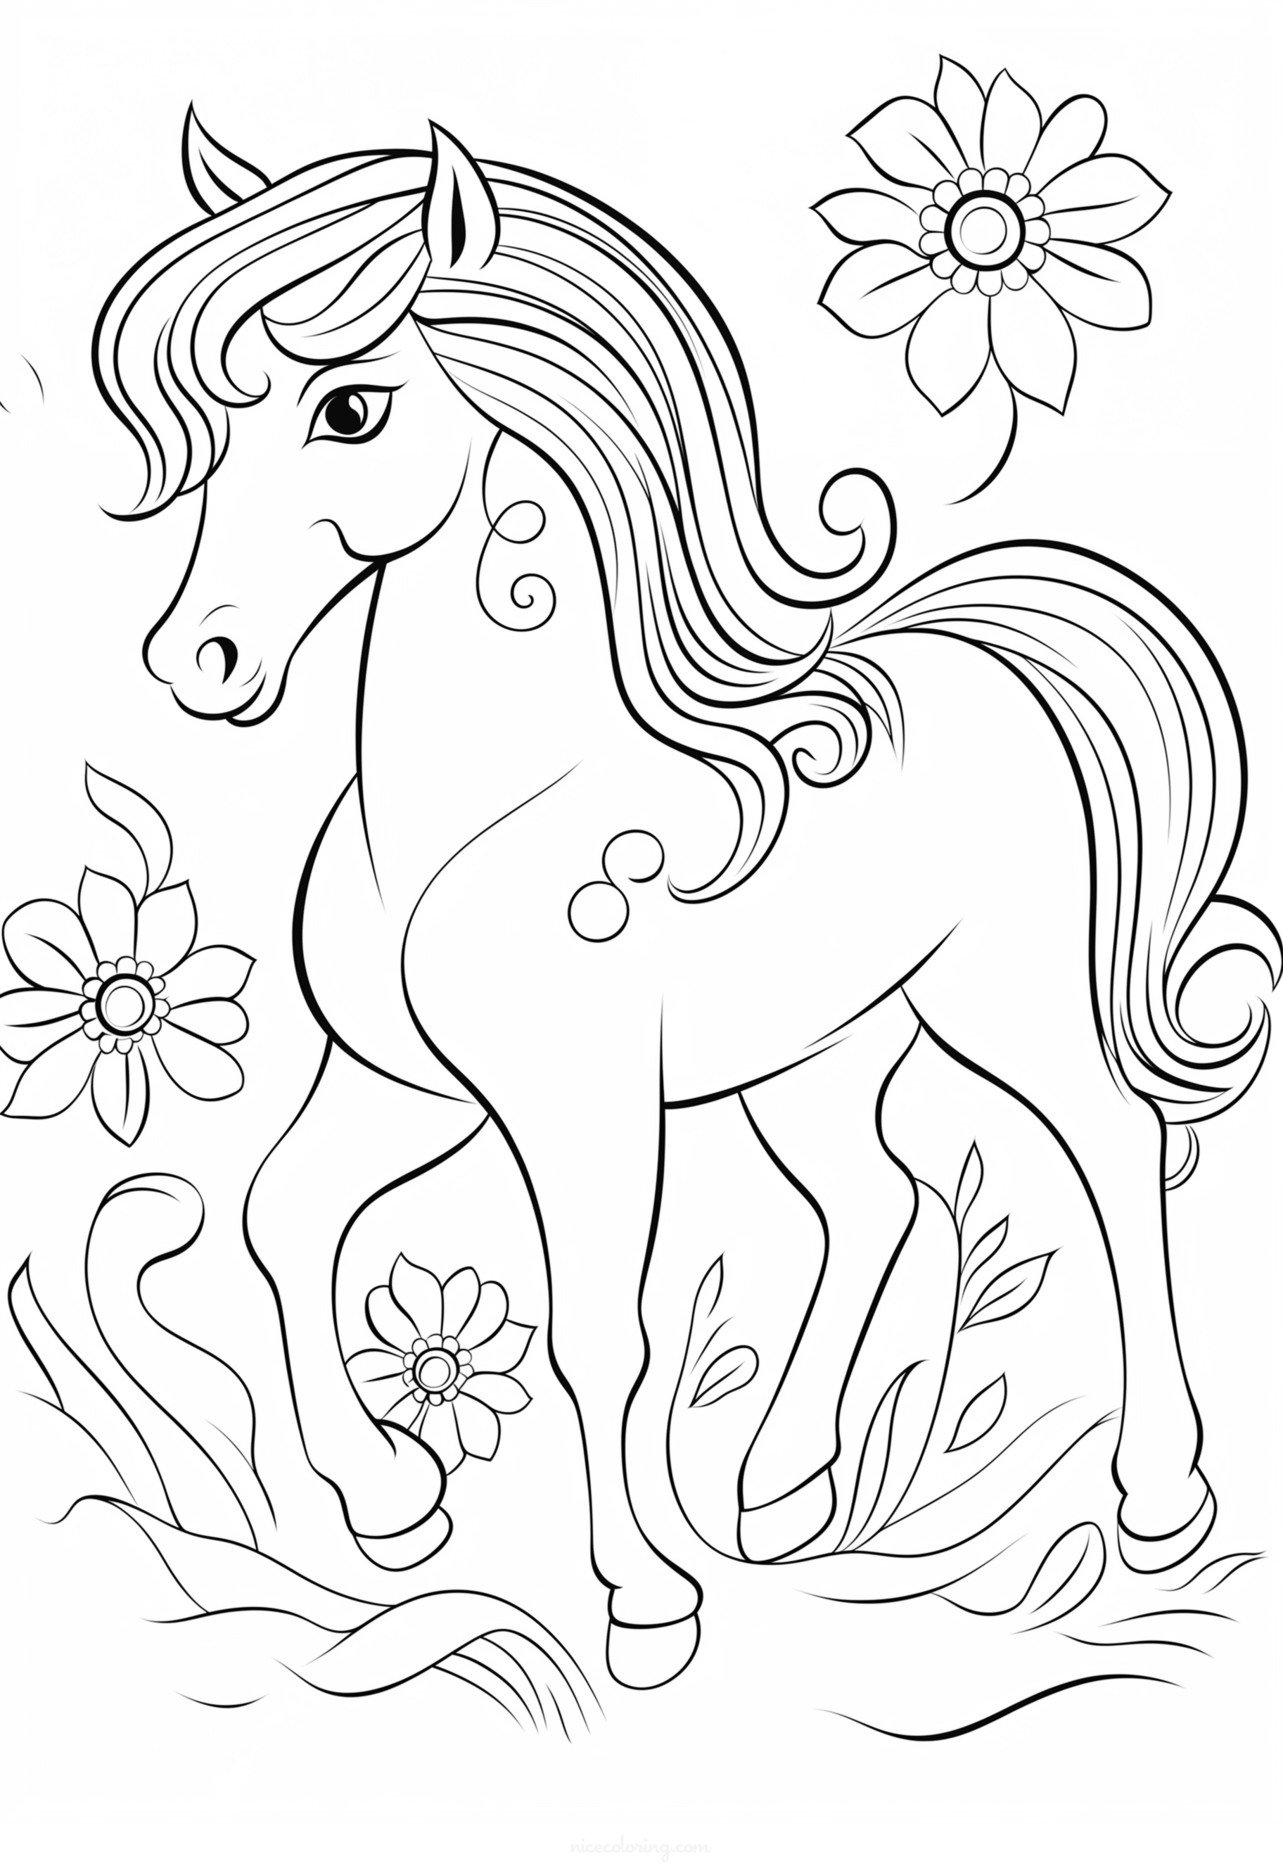 Majestic horse with flowing mane coloring page